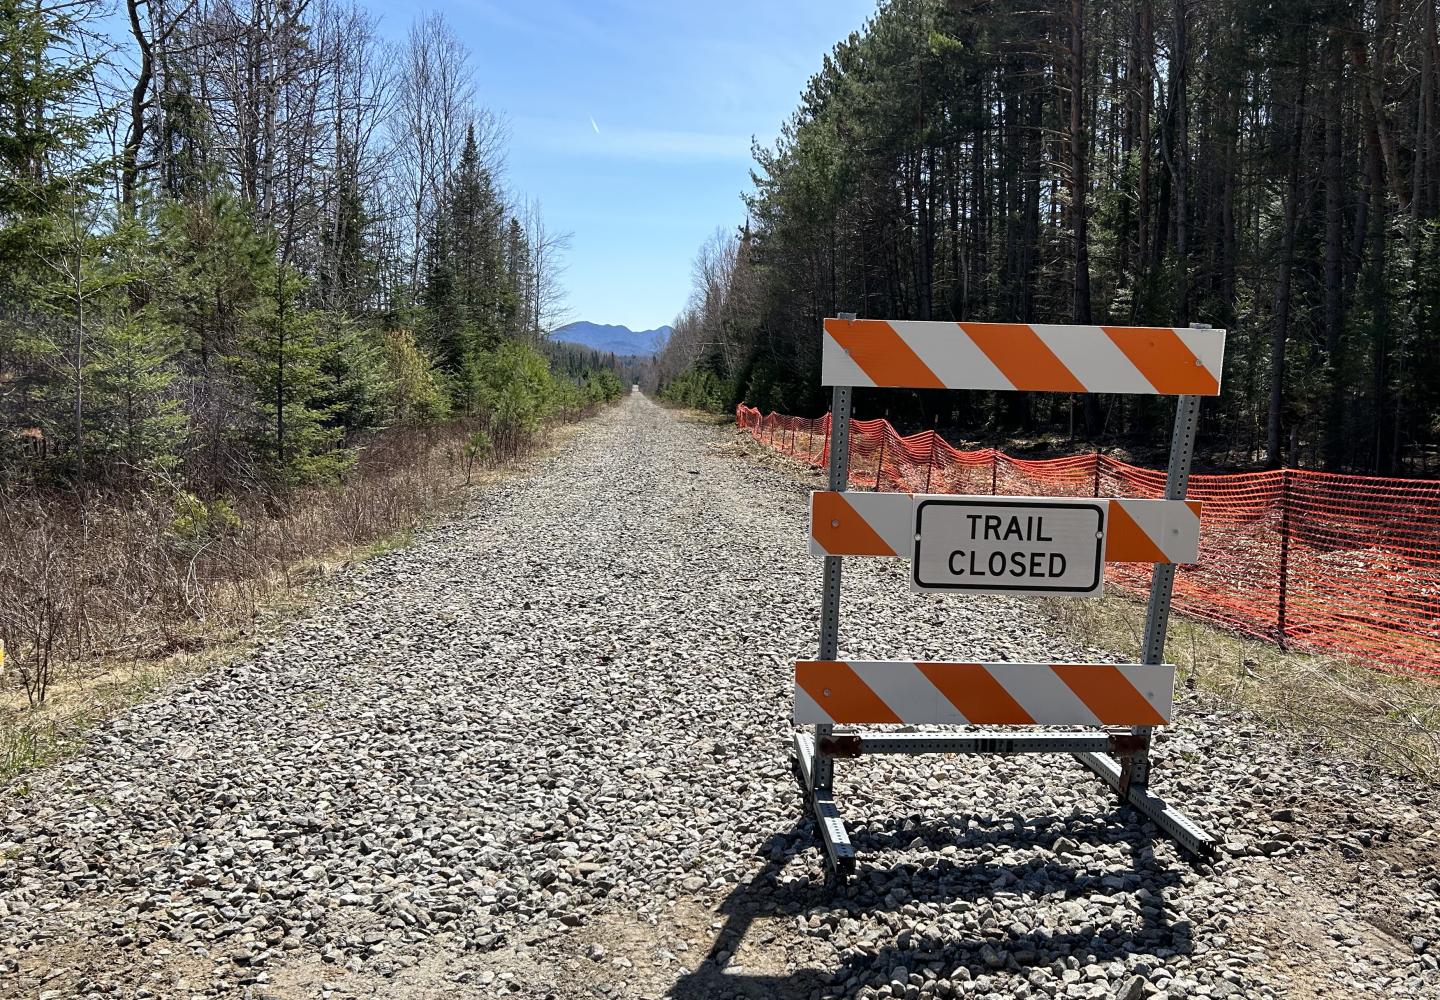 Phase 1 construction of the Adirondack Rail Trail between Lake Placid and Saranac Lake is underway.